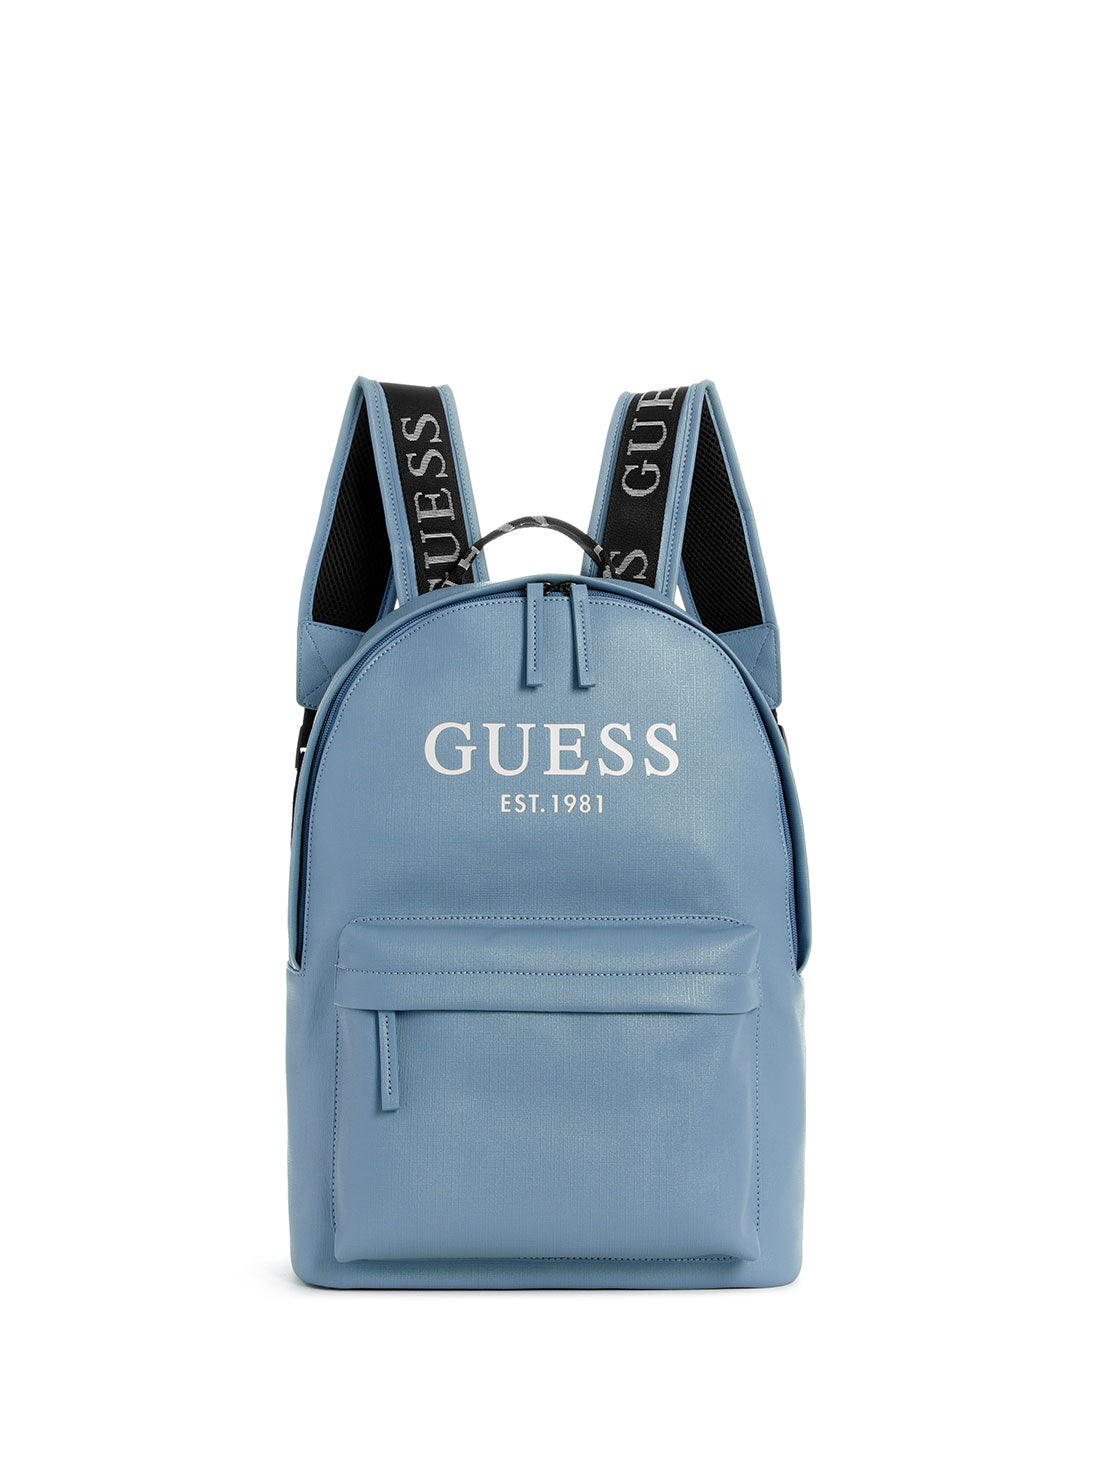 GUESS Blue Logo Outfitter Backpack front view